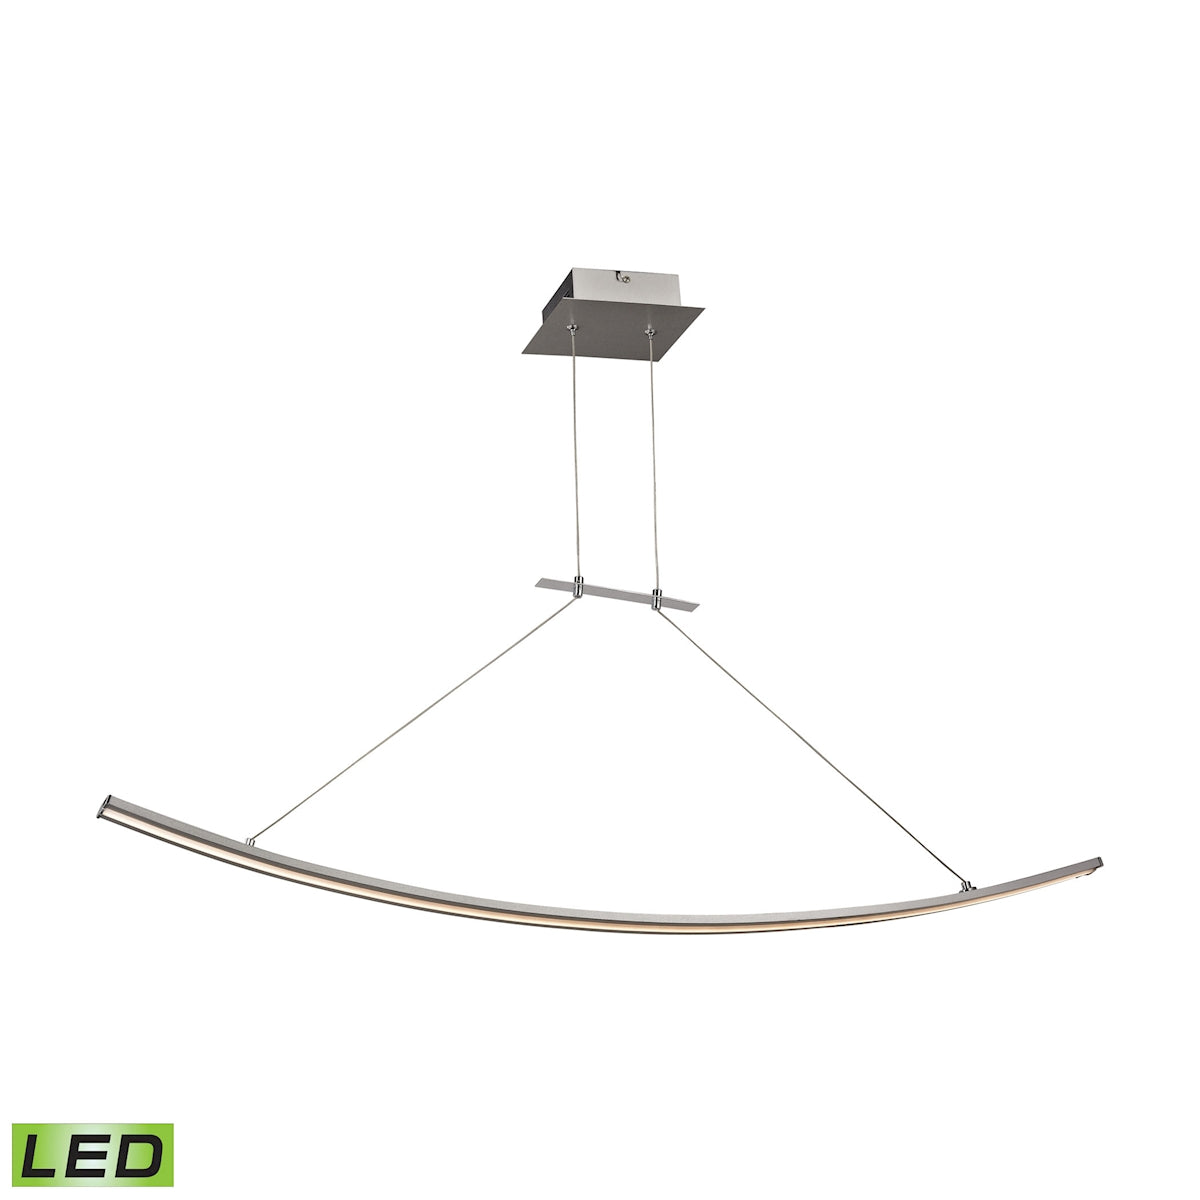 ELK Lighting LC1310-10-98 Bow 1-Light Island Light in Aluminum with White Polycarbonate Diffuser - Integrated LED